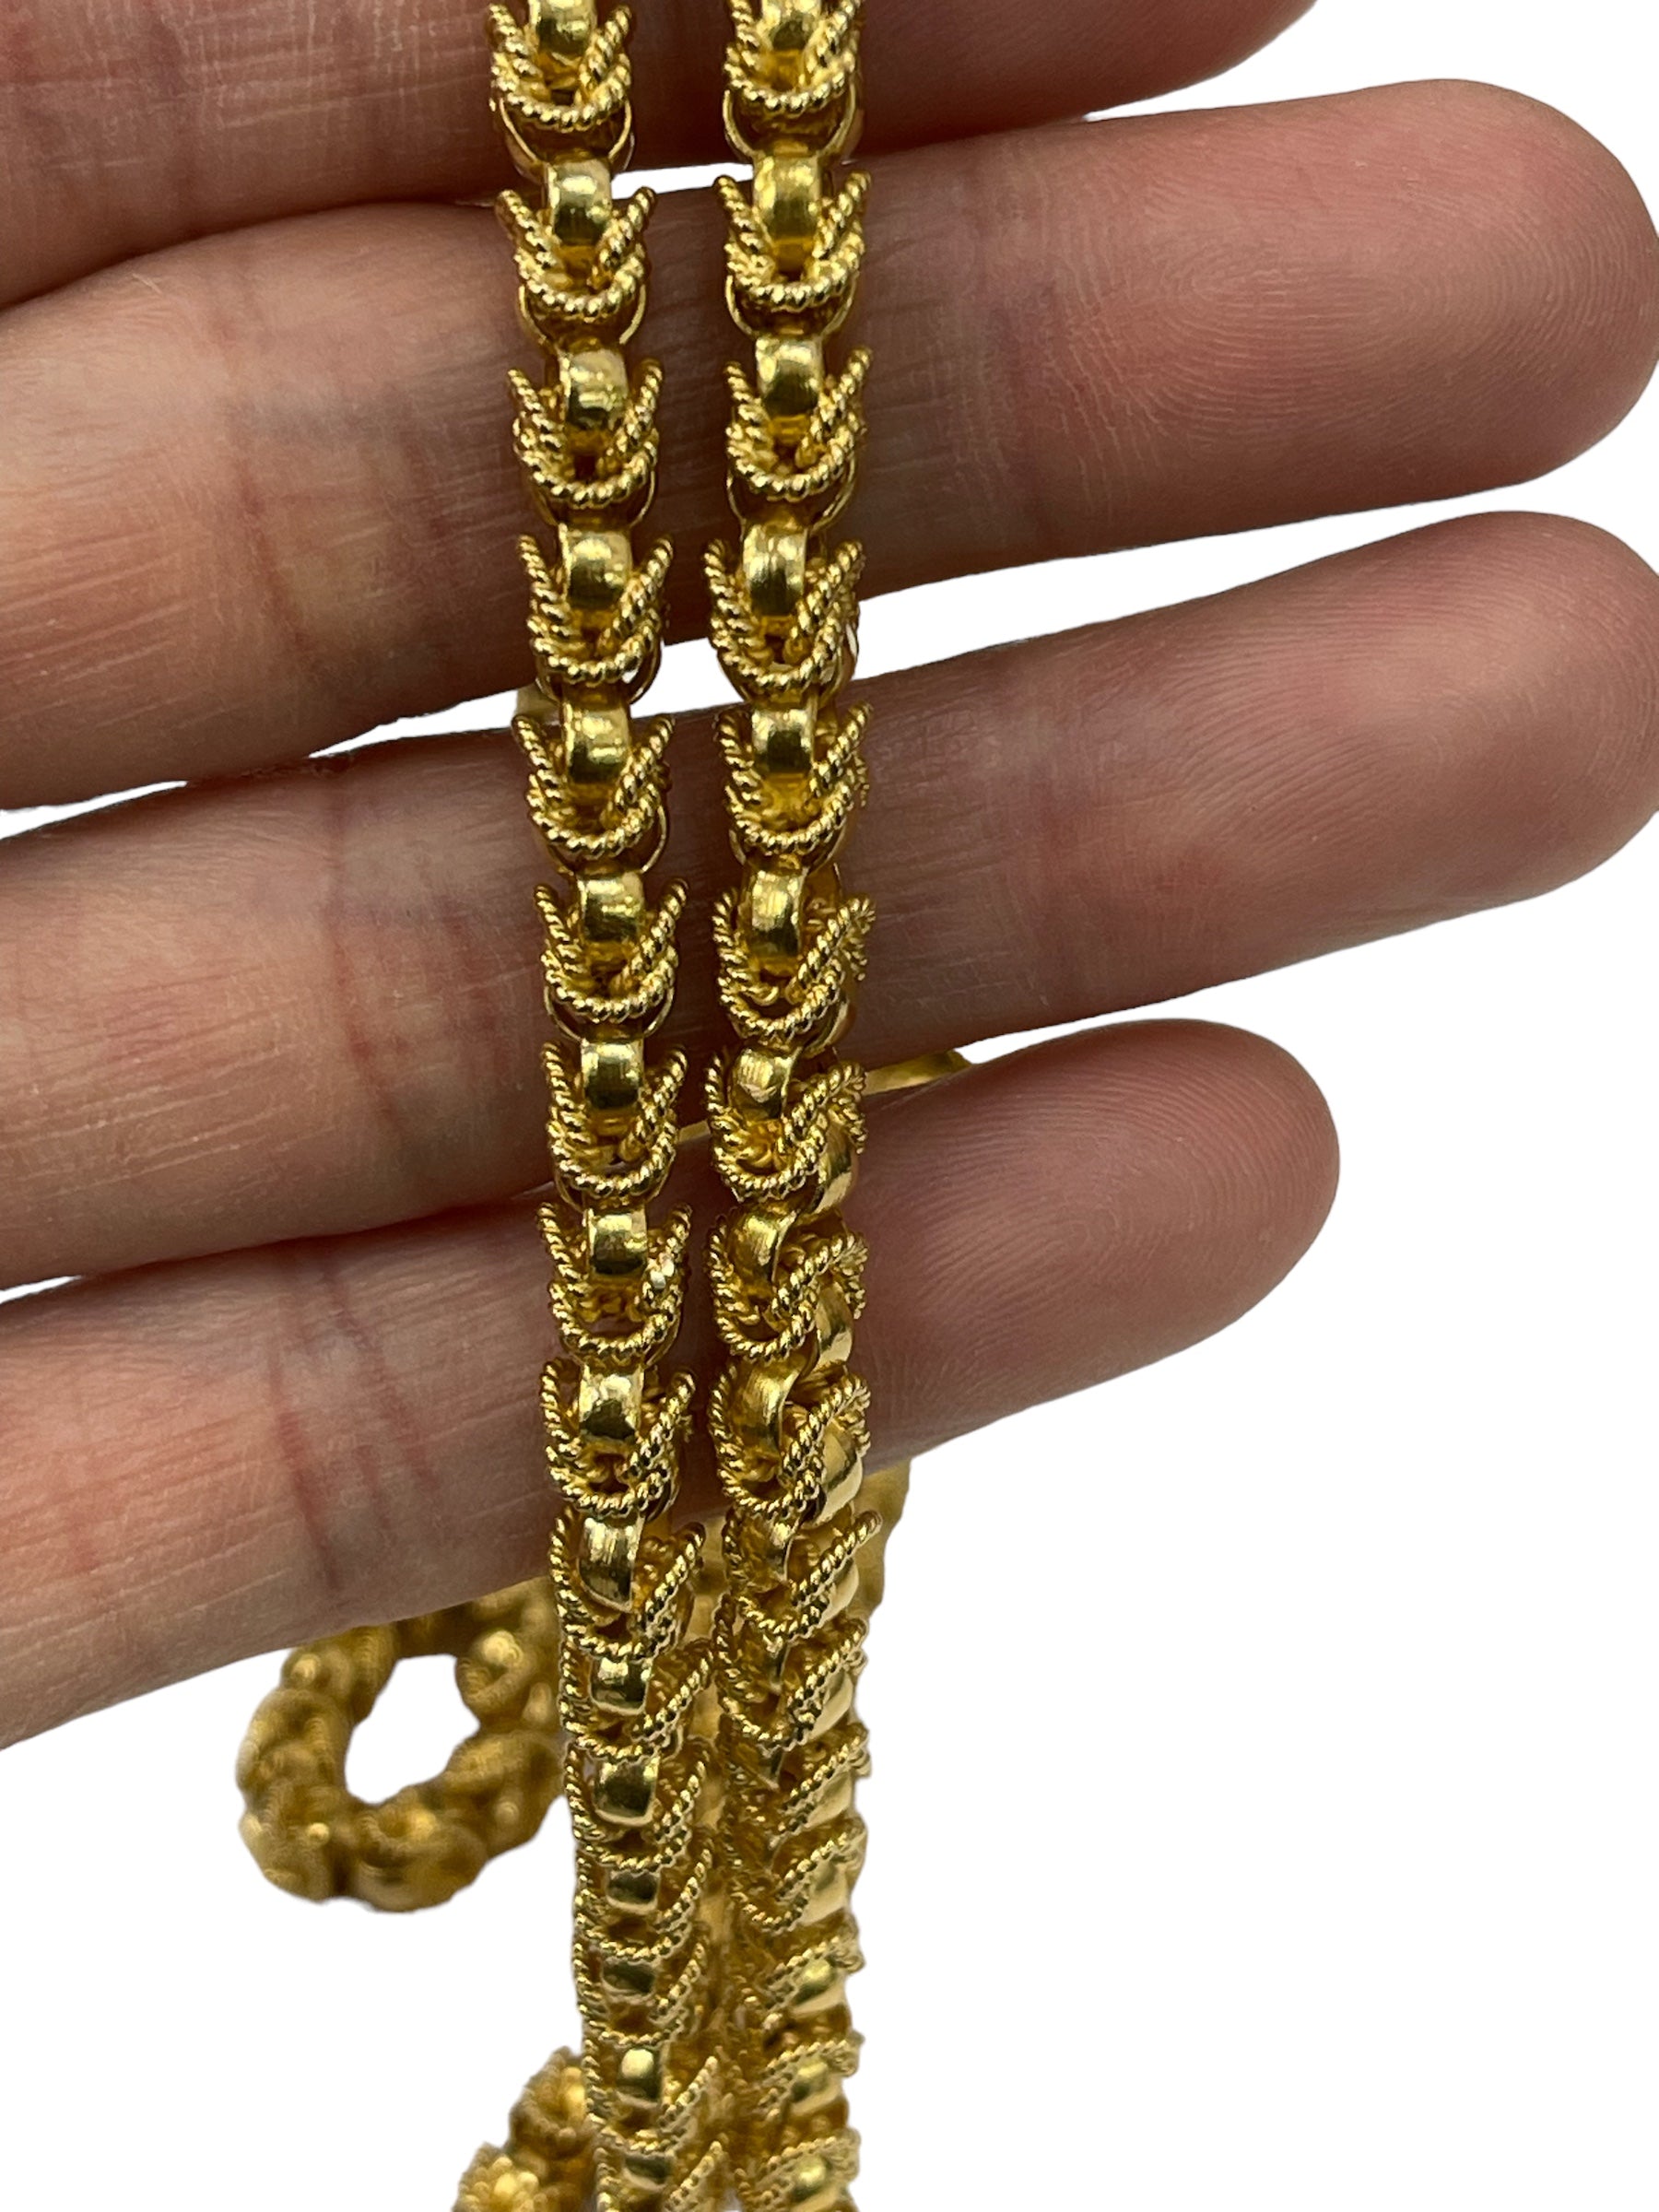 Flower Bud Yellow Gold Necklace Chain 33.5" Solid 18kt